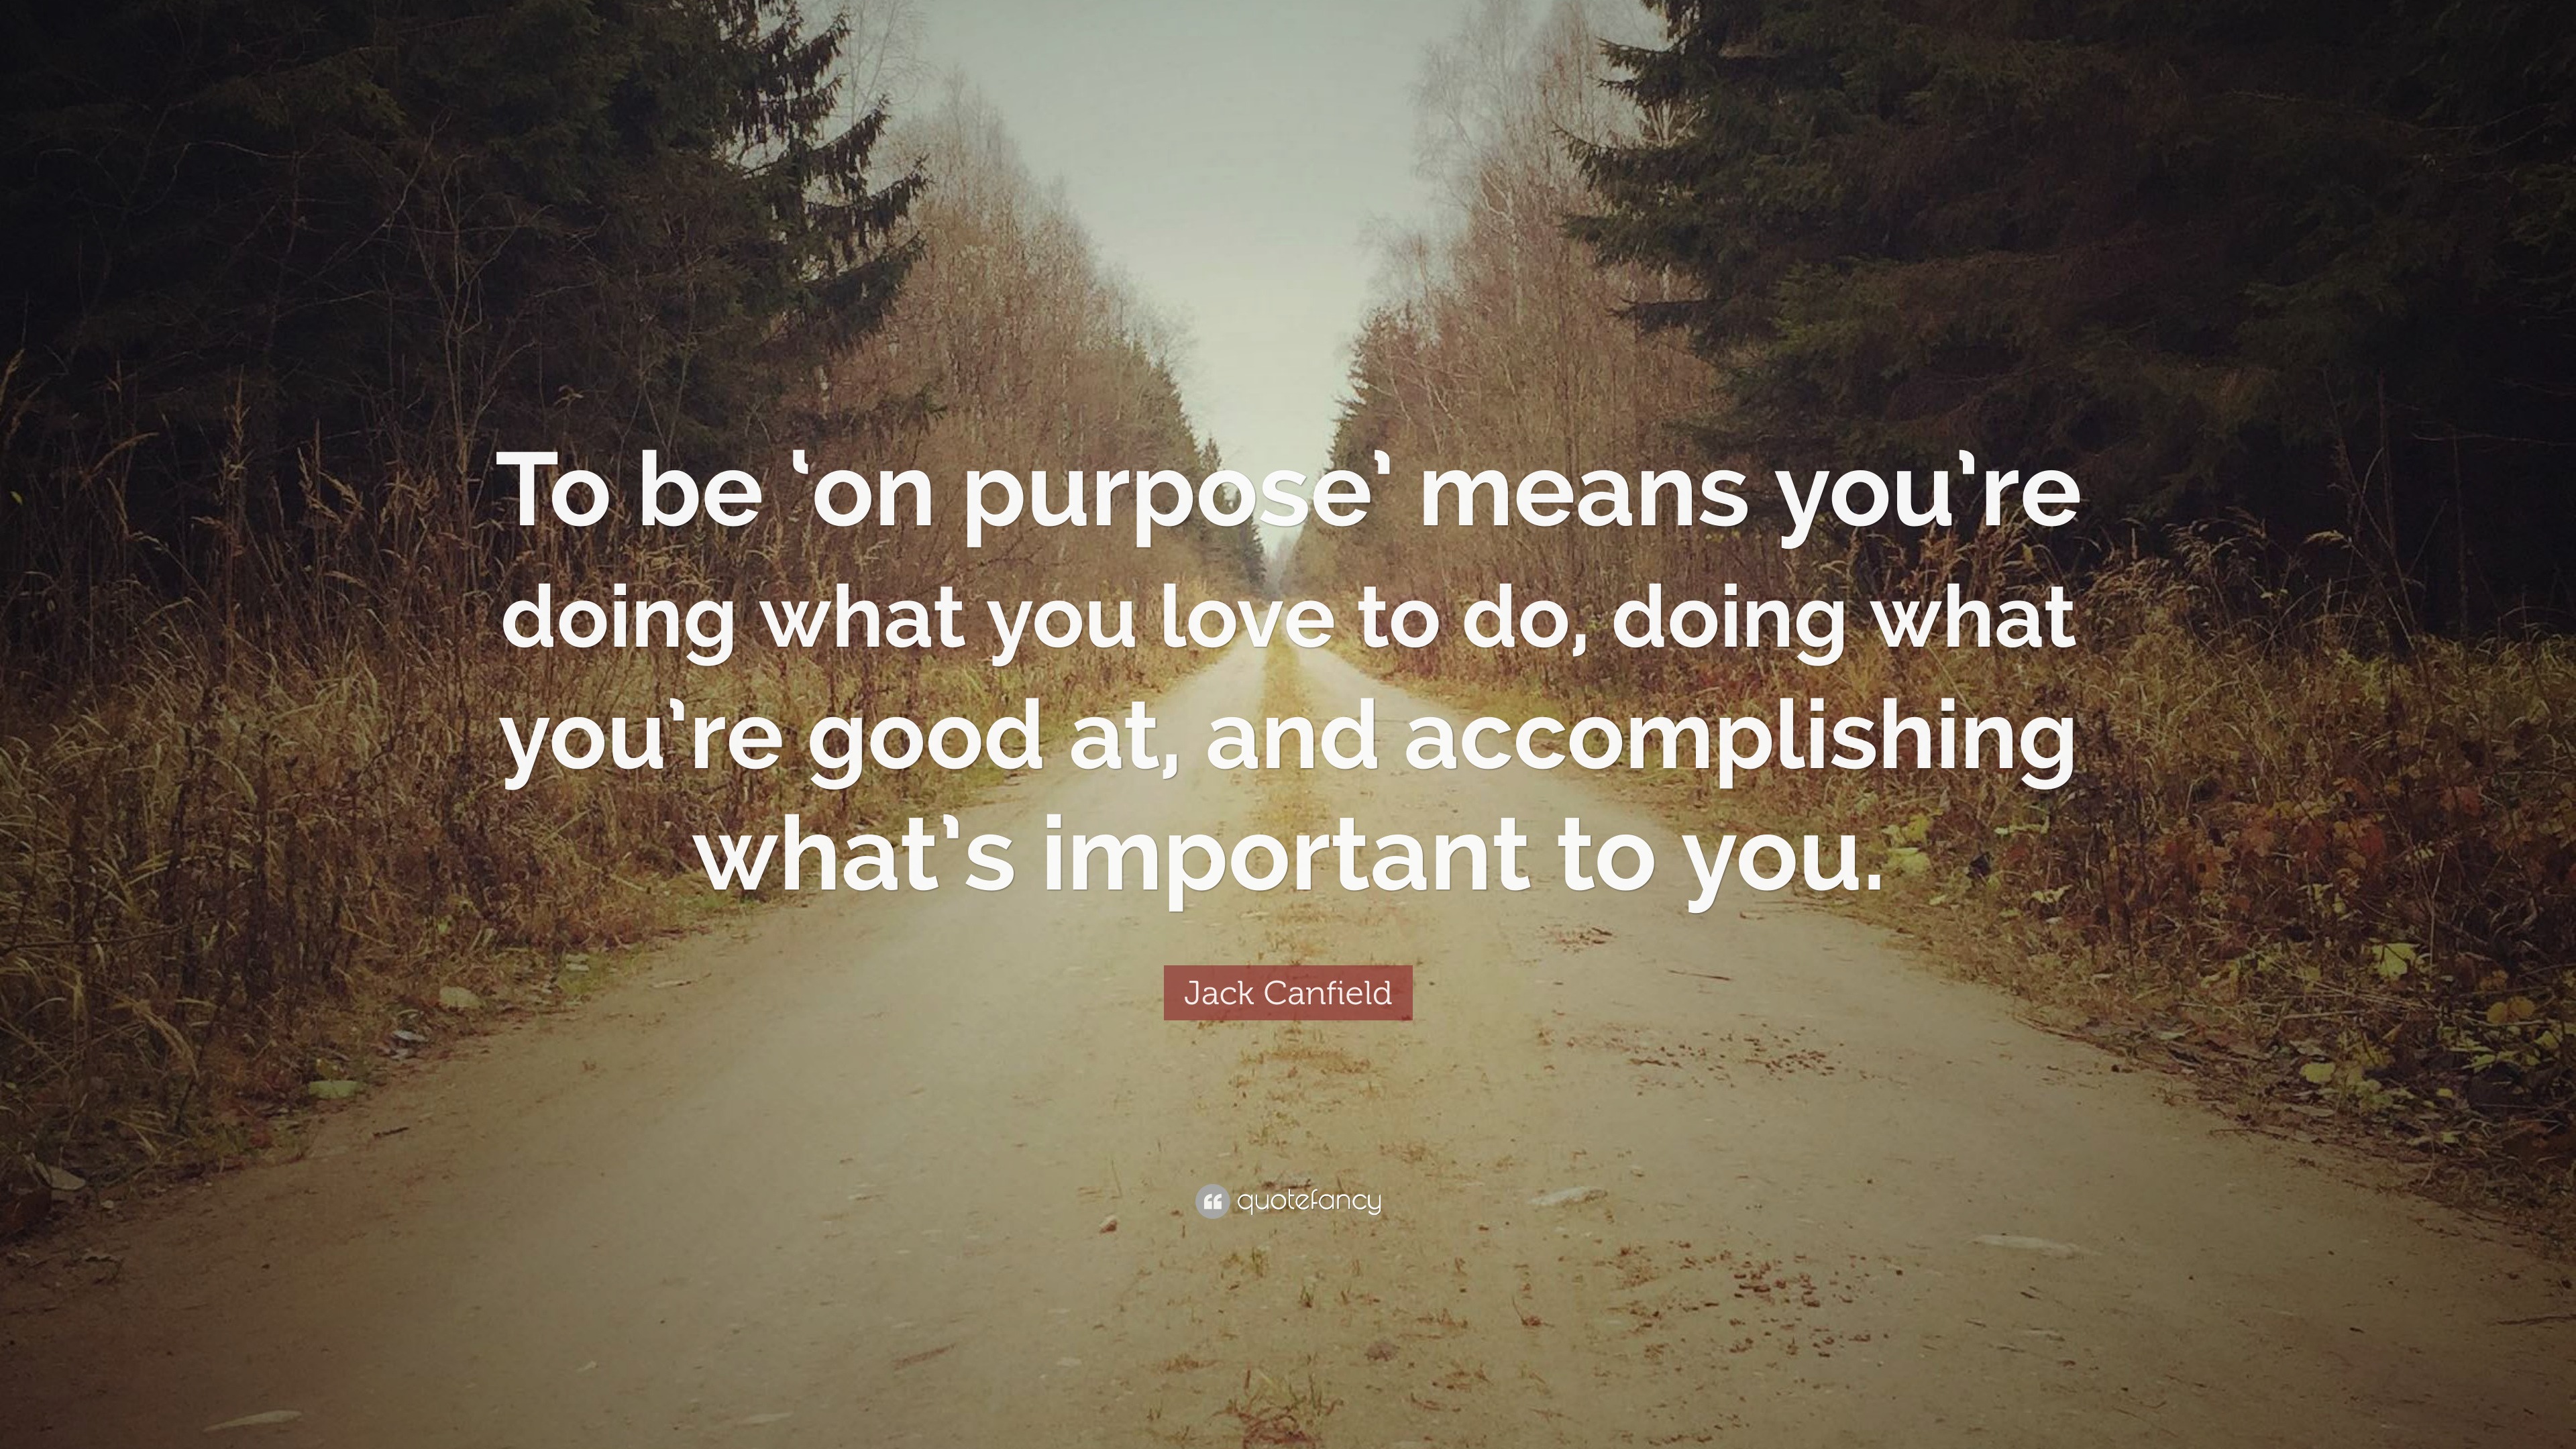 Jack Canfield Quote: “To be ‘on purpose’ means you’re doing what you ...